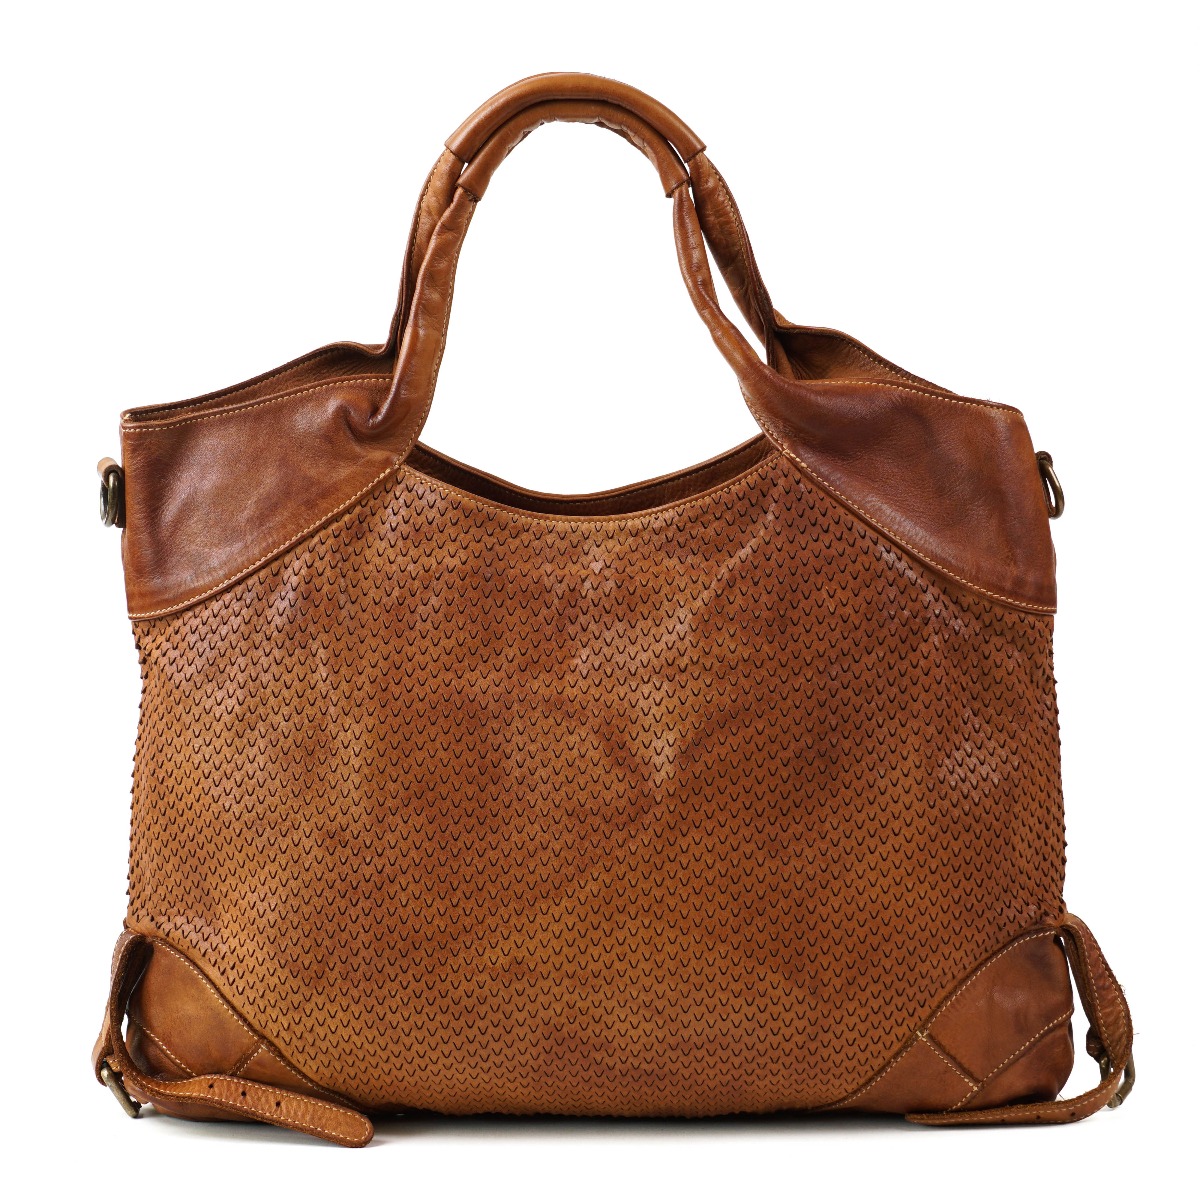 Cognac color cutting leather bag for women